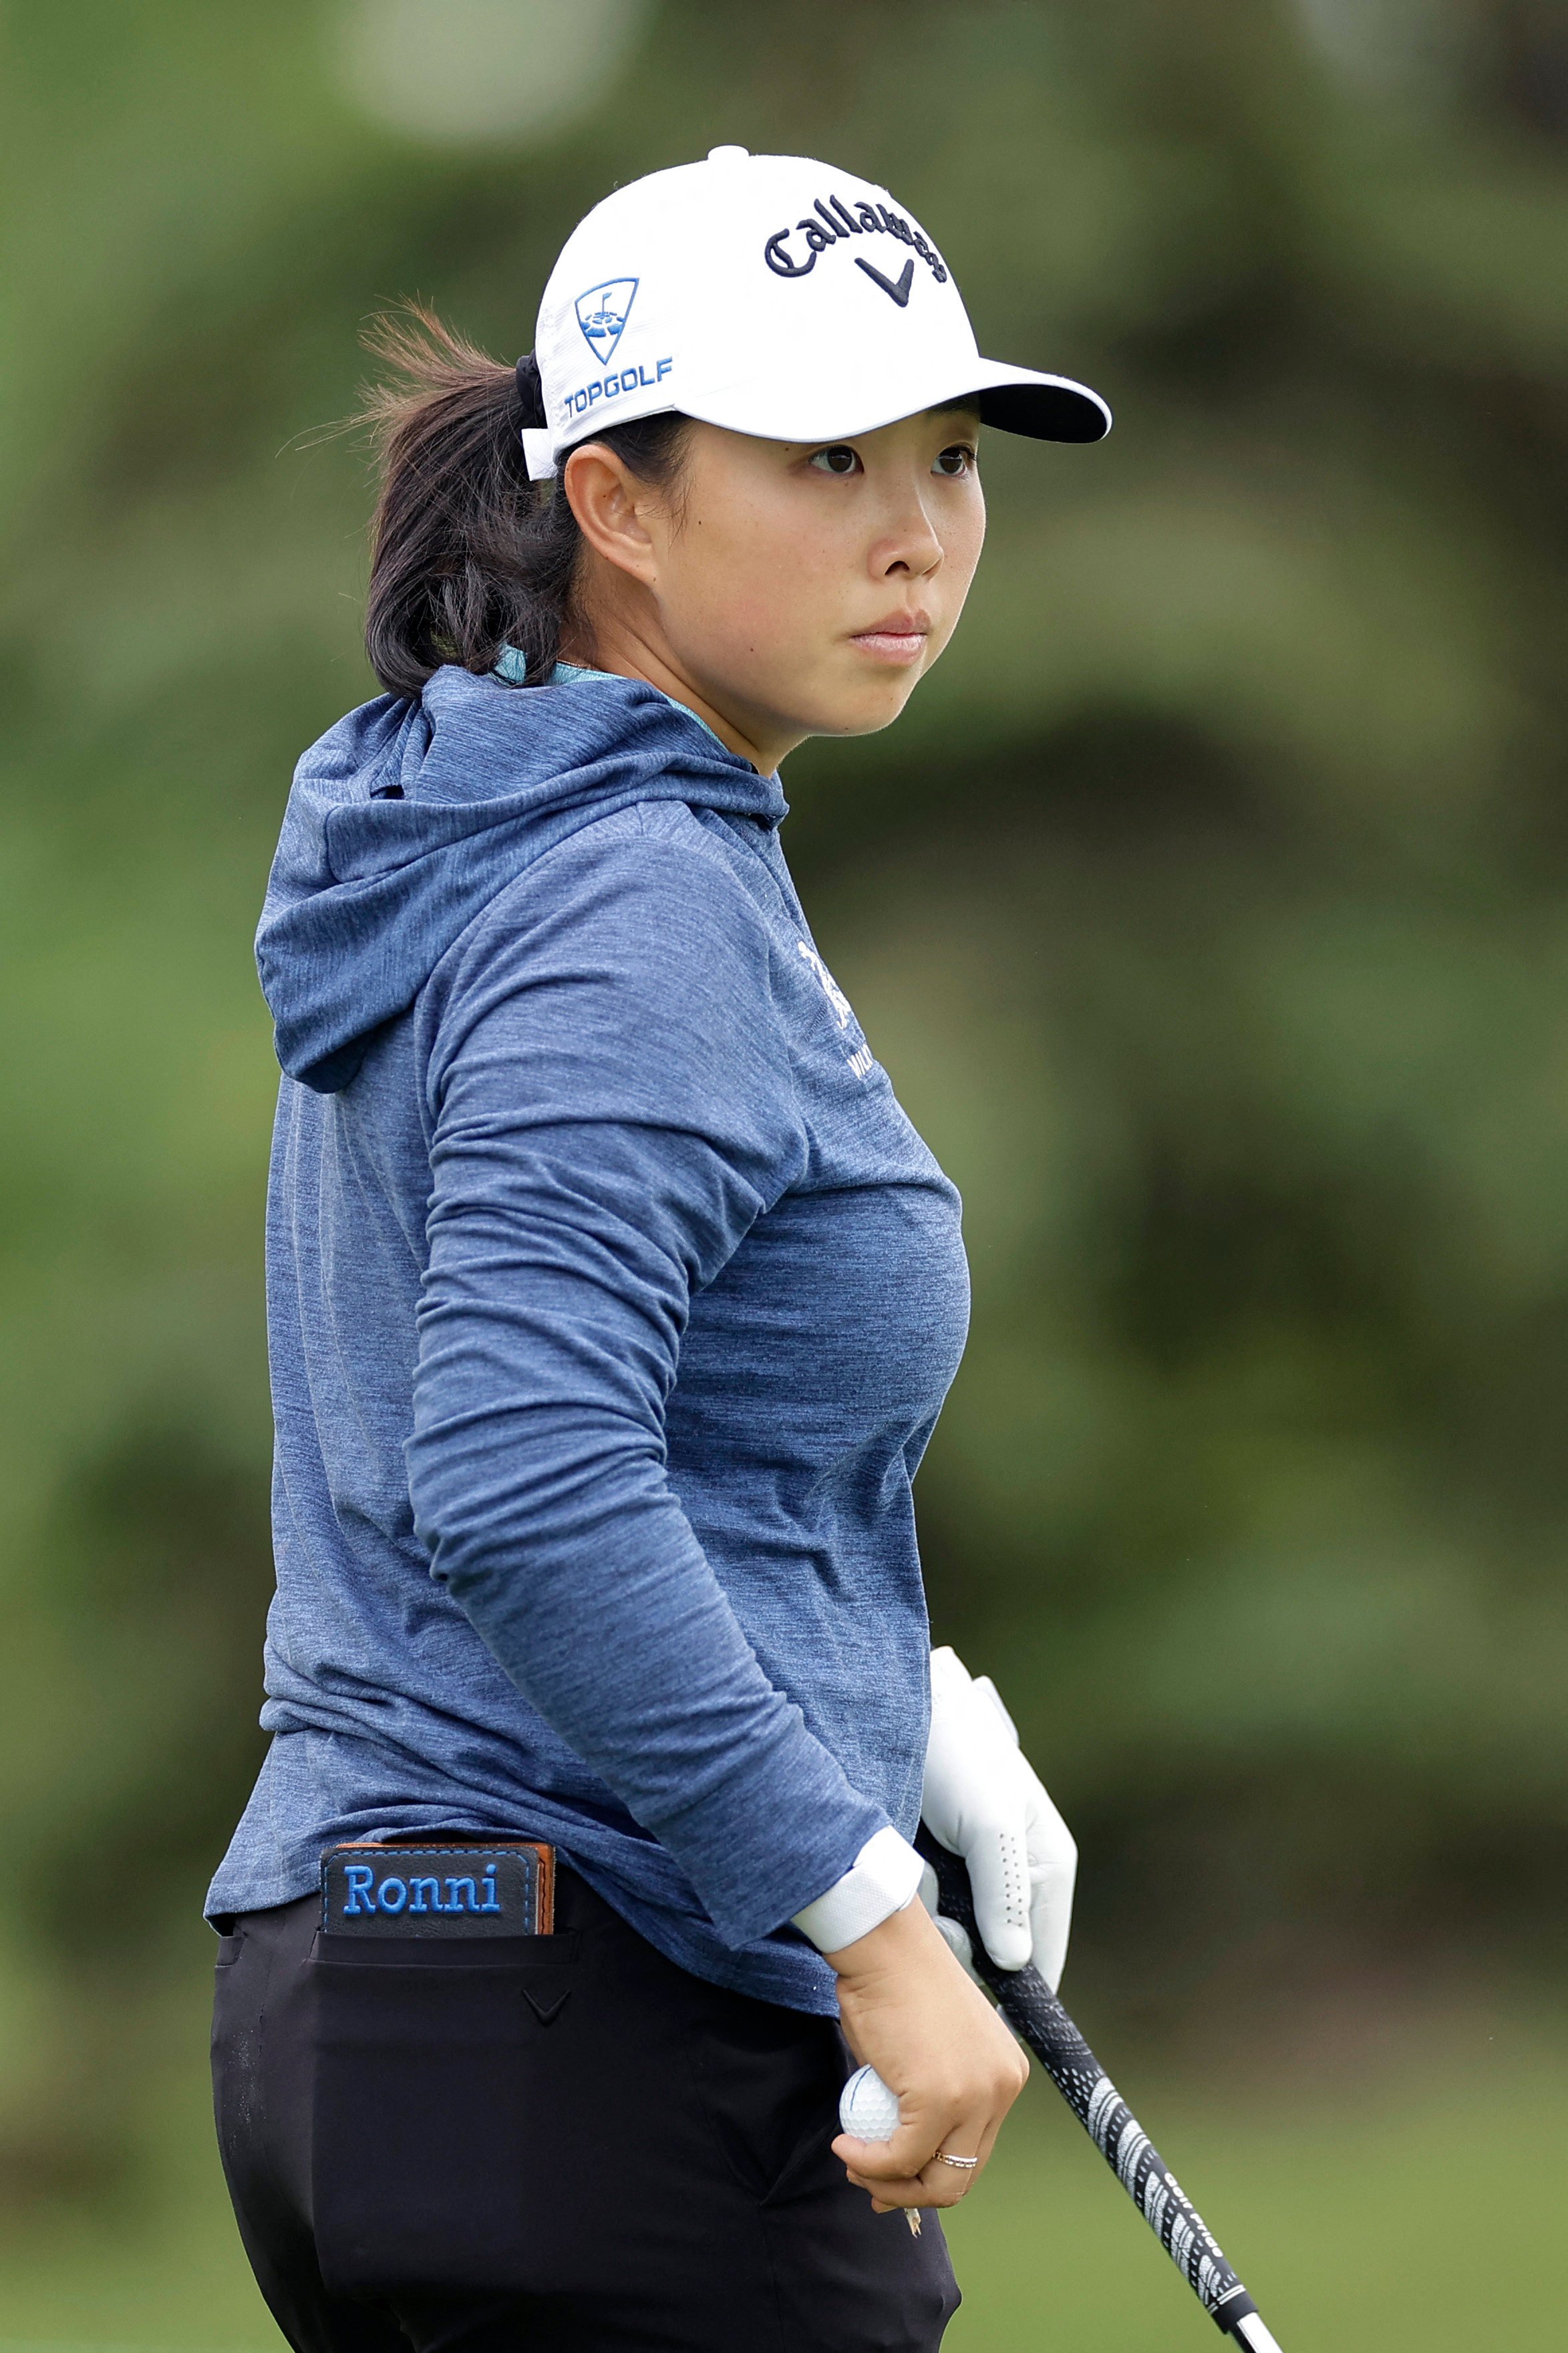 China’s Ruoning Yin was one of 10 players to withdraw from the Mizuho Americas Open at Liberty National Golf Club. Photo: AFP